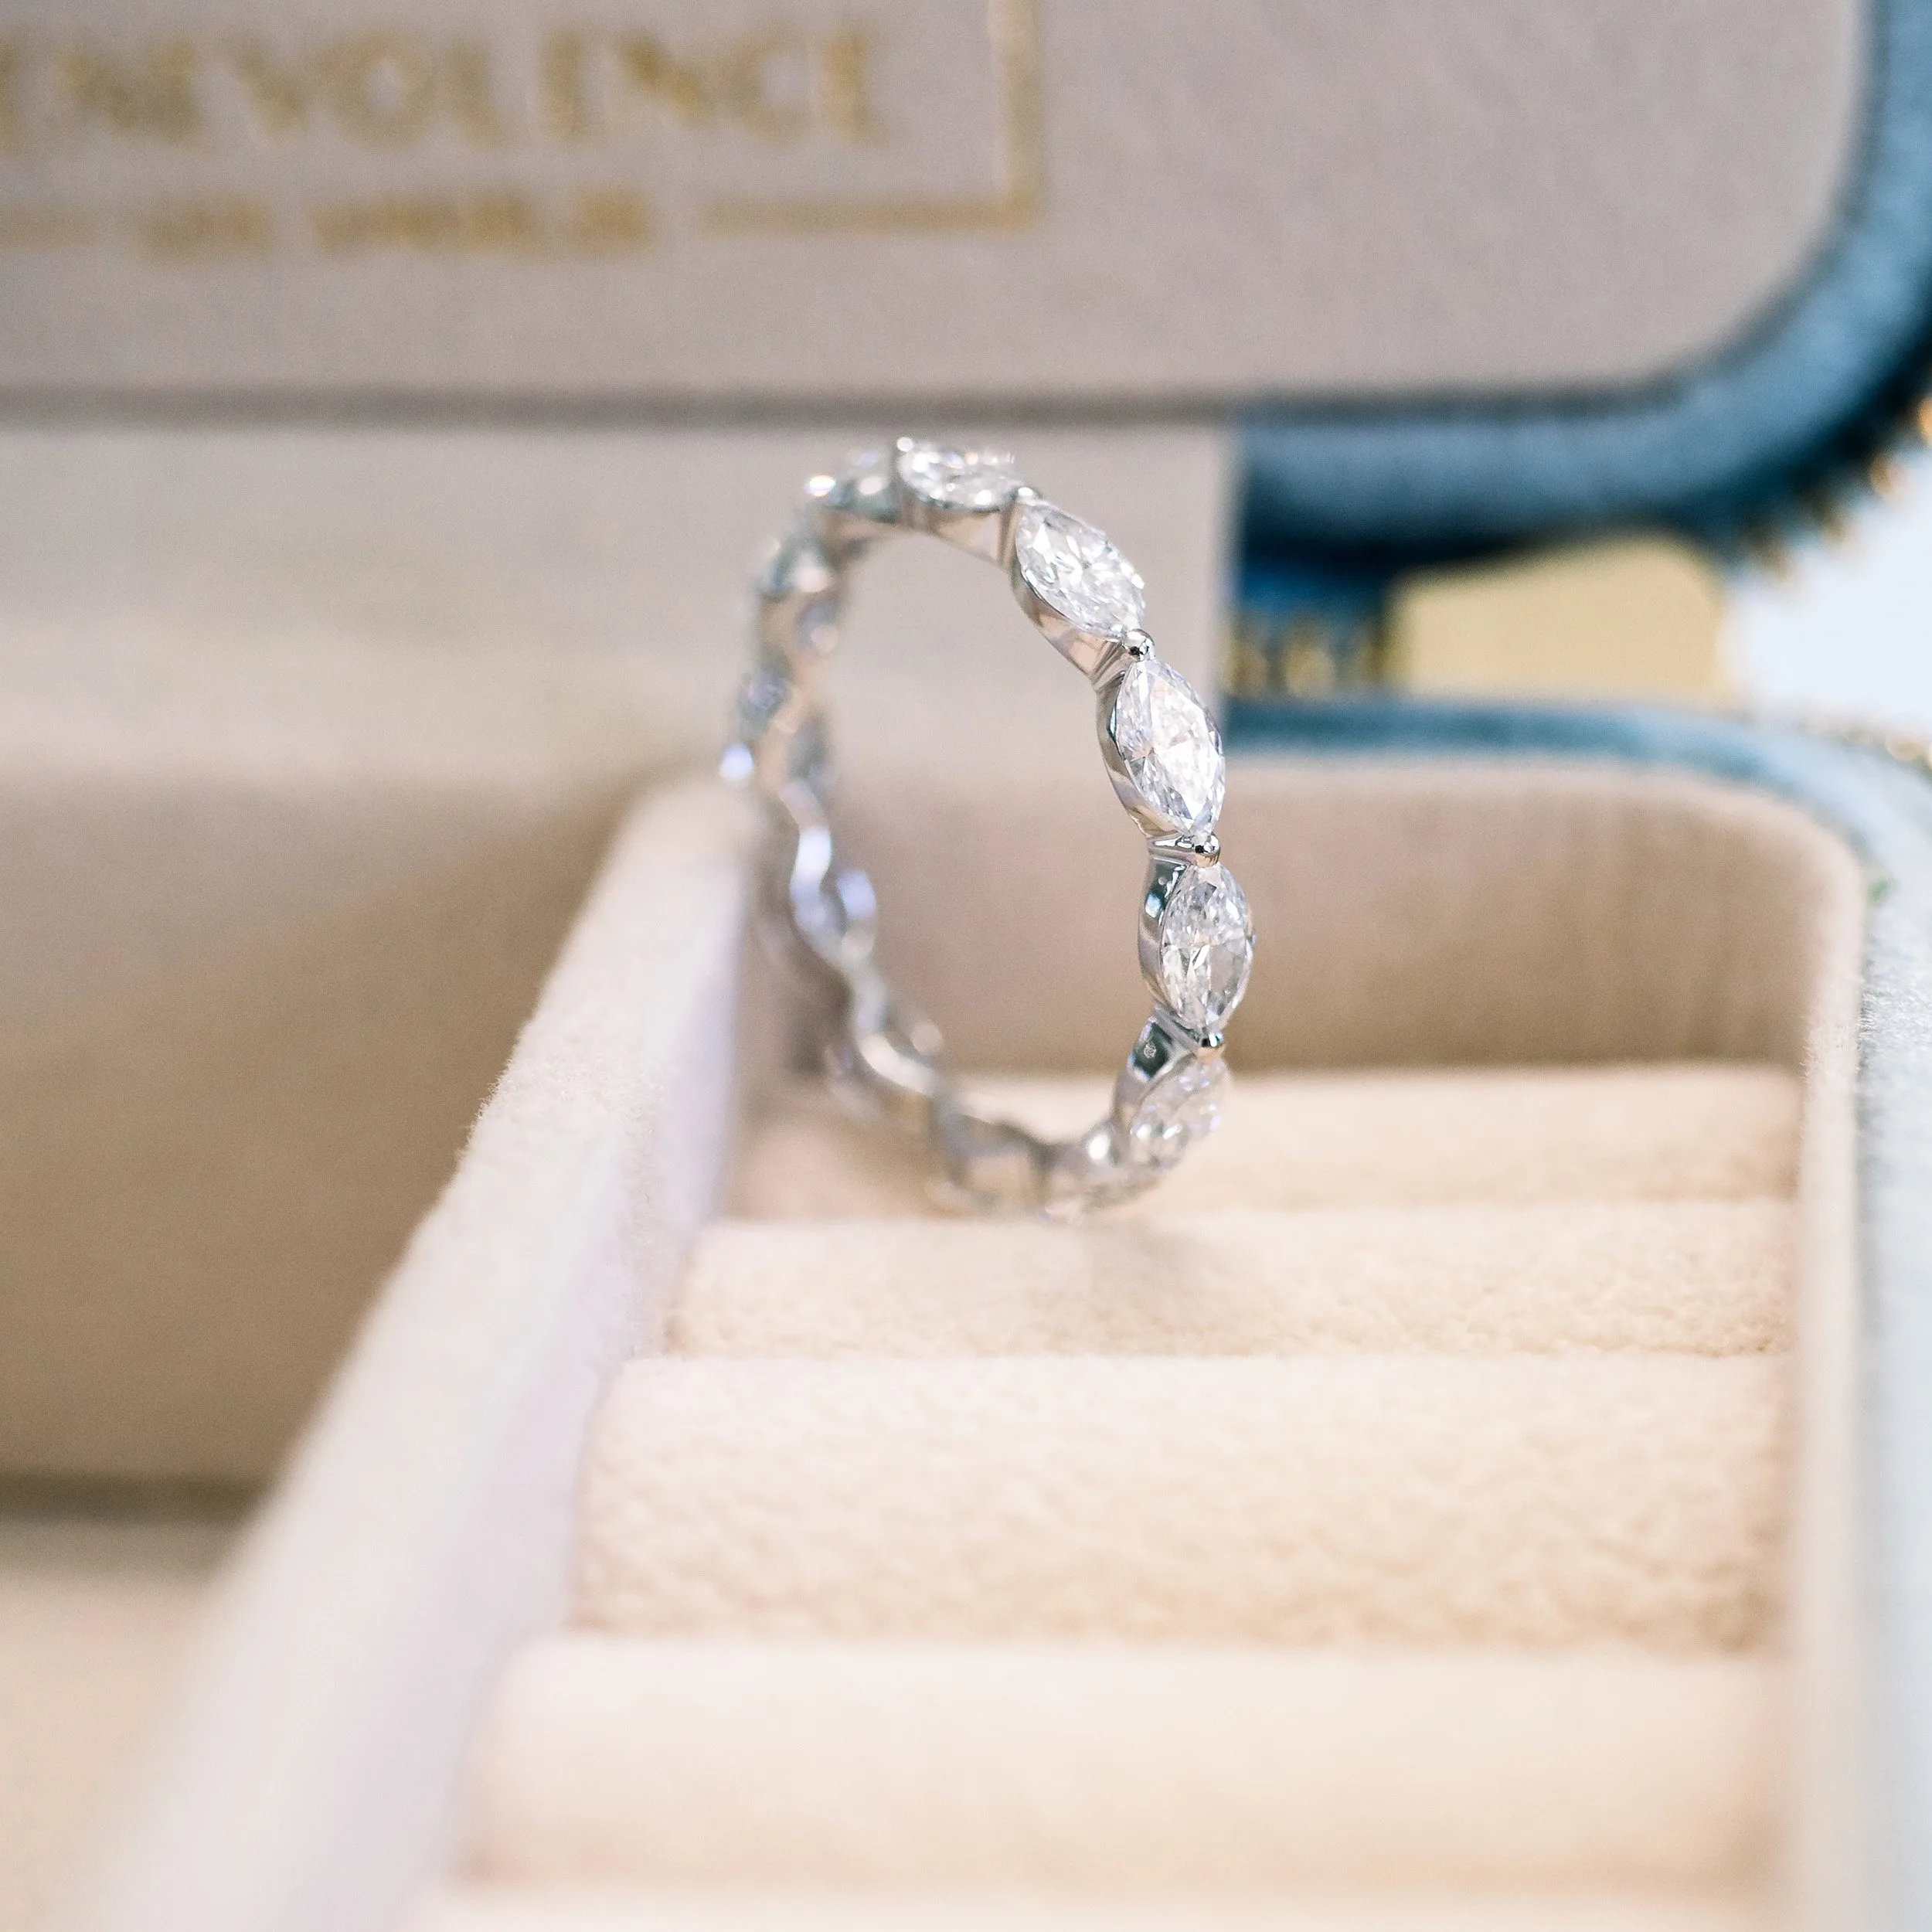 1.8ctw marrquise eternity band profile view in 18k white gold